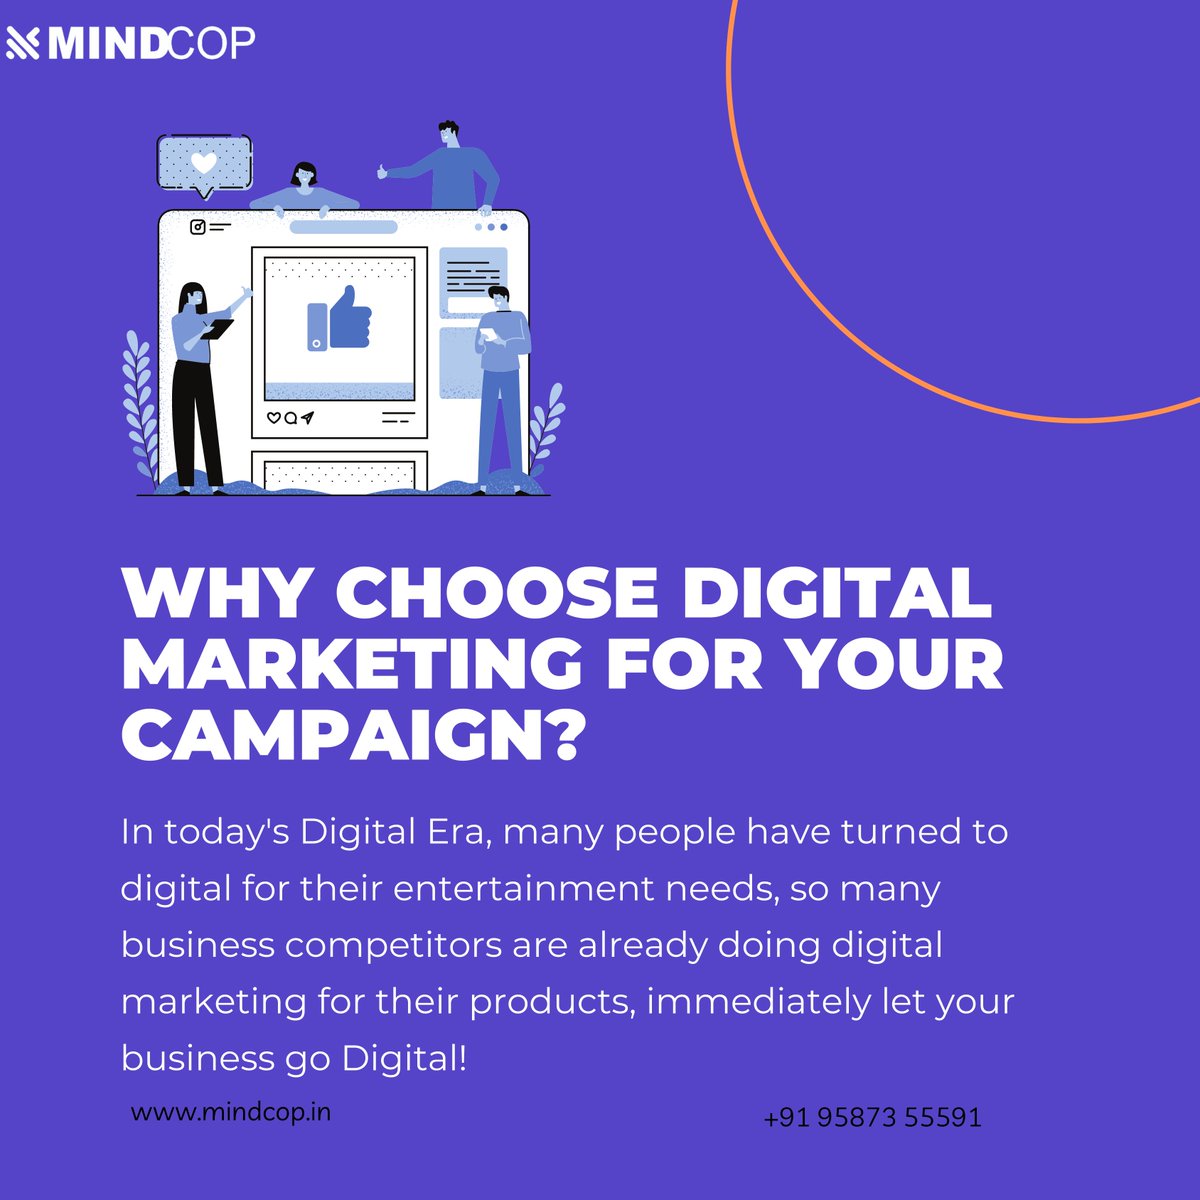 Unlocking Success with Digital Marketing! 🚀
📈 From reaching a wider audience to engaging with potential customers in real time, the benefits are endless! 💼💻

#DigitalMarketing #CampaignSuccess #TechRevolution #DigitalStrategy #EngageAndGrow #OnlineVisibility #BoostYour